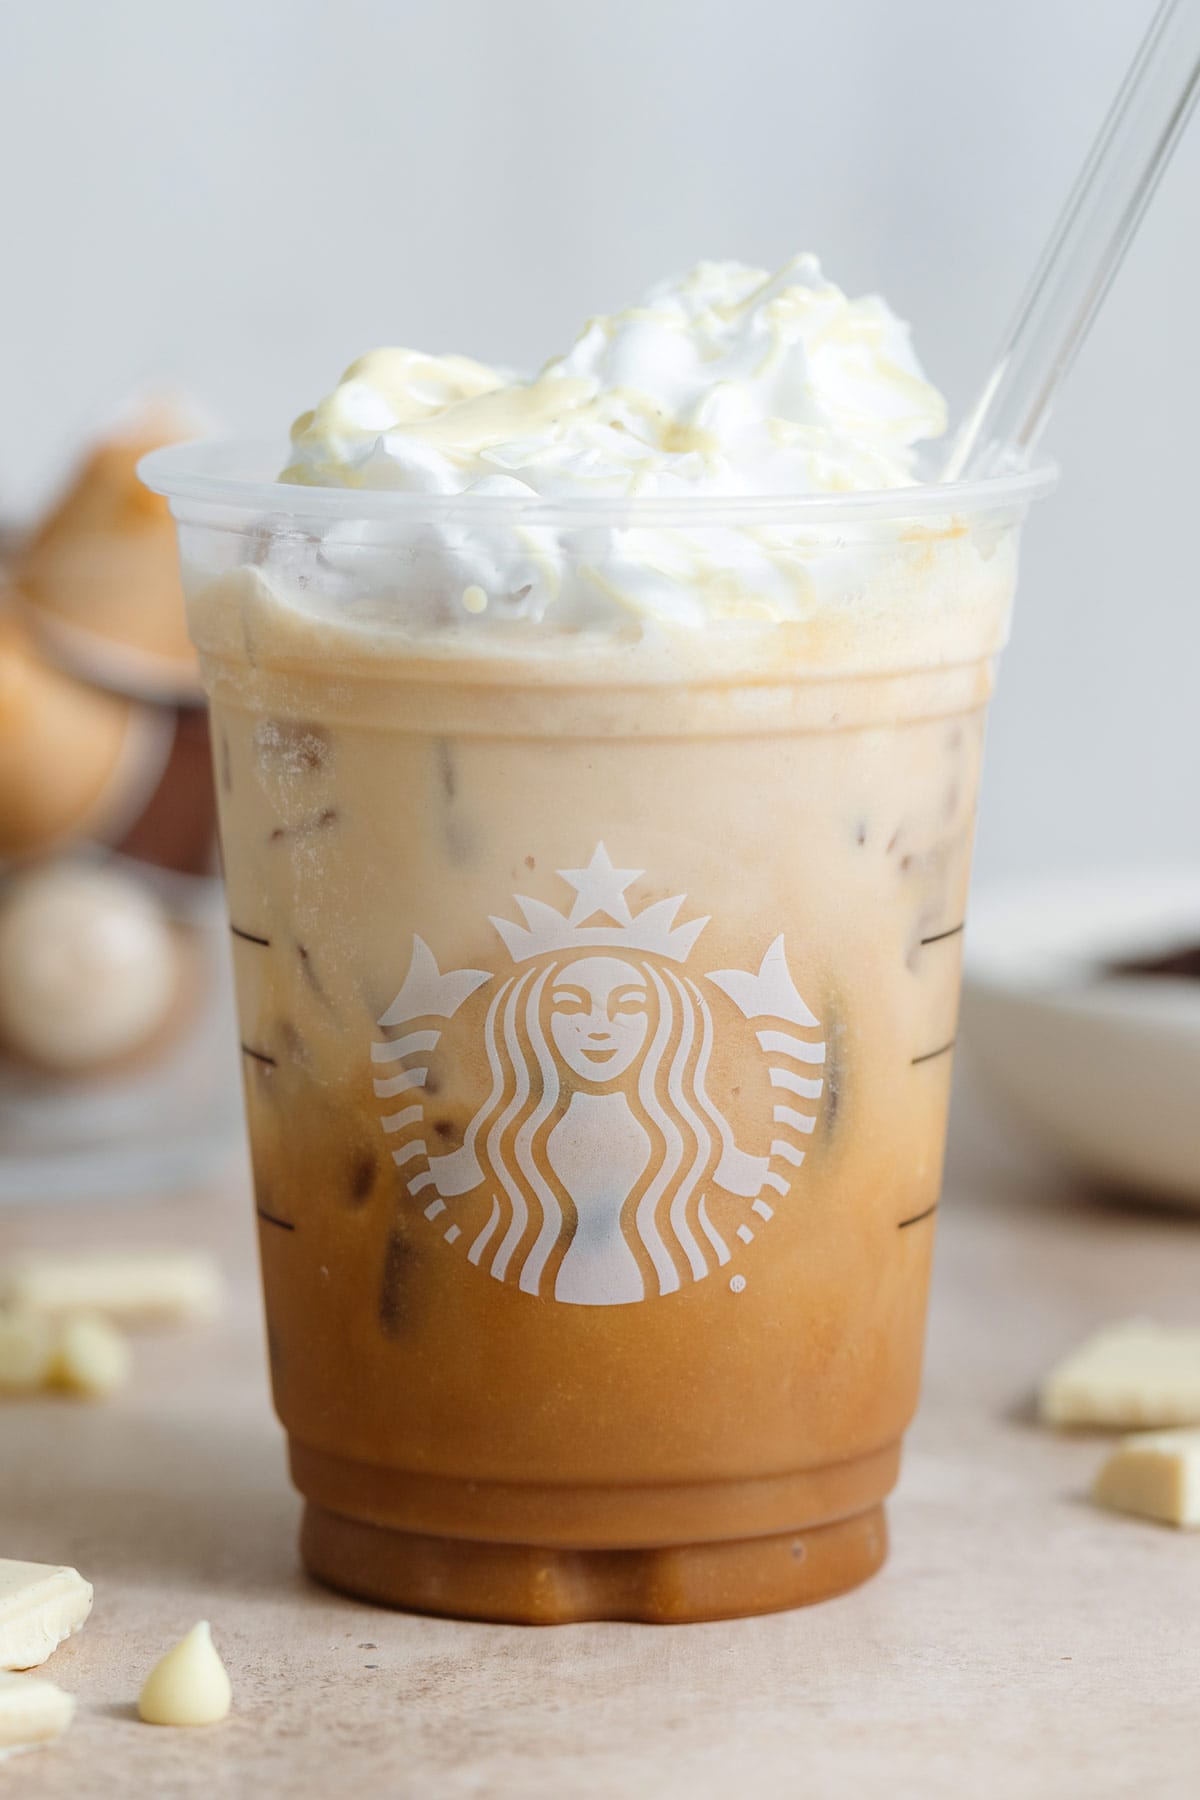 A plastic Starbucks cup with iced mocha over ice garnished with whipped cream and melted white chocolate.